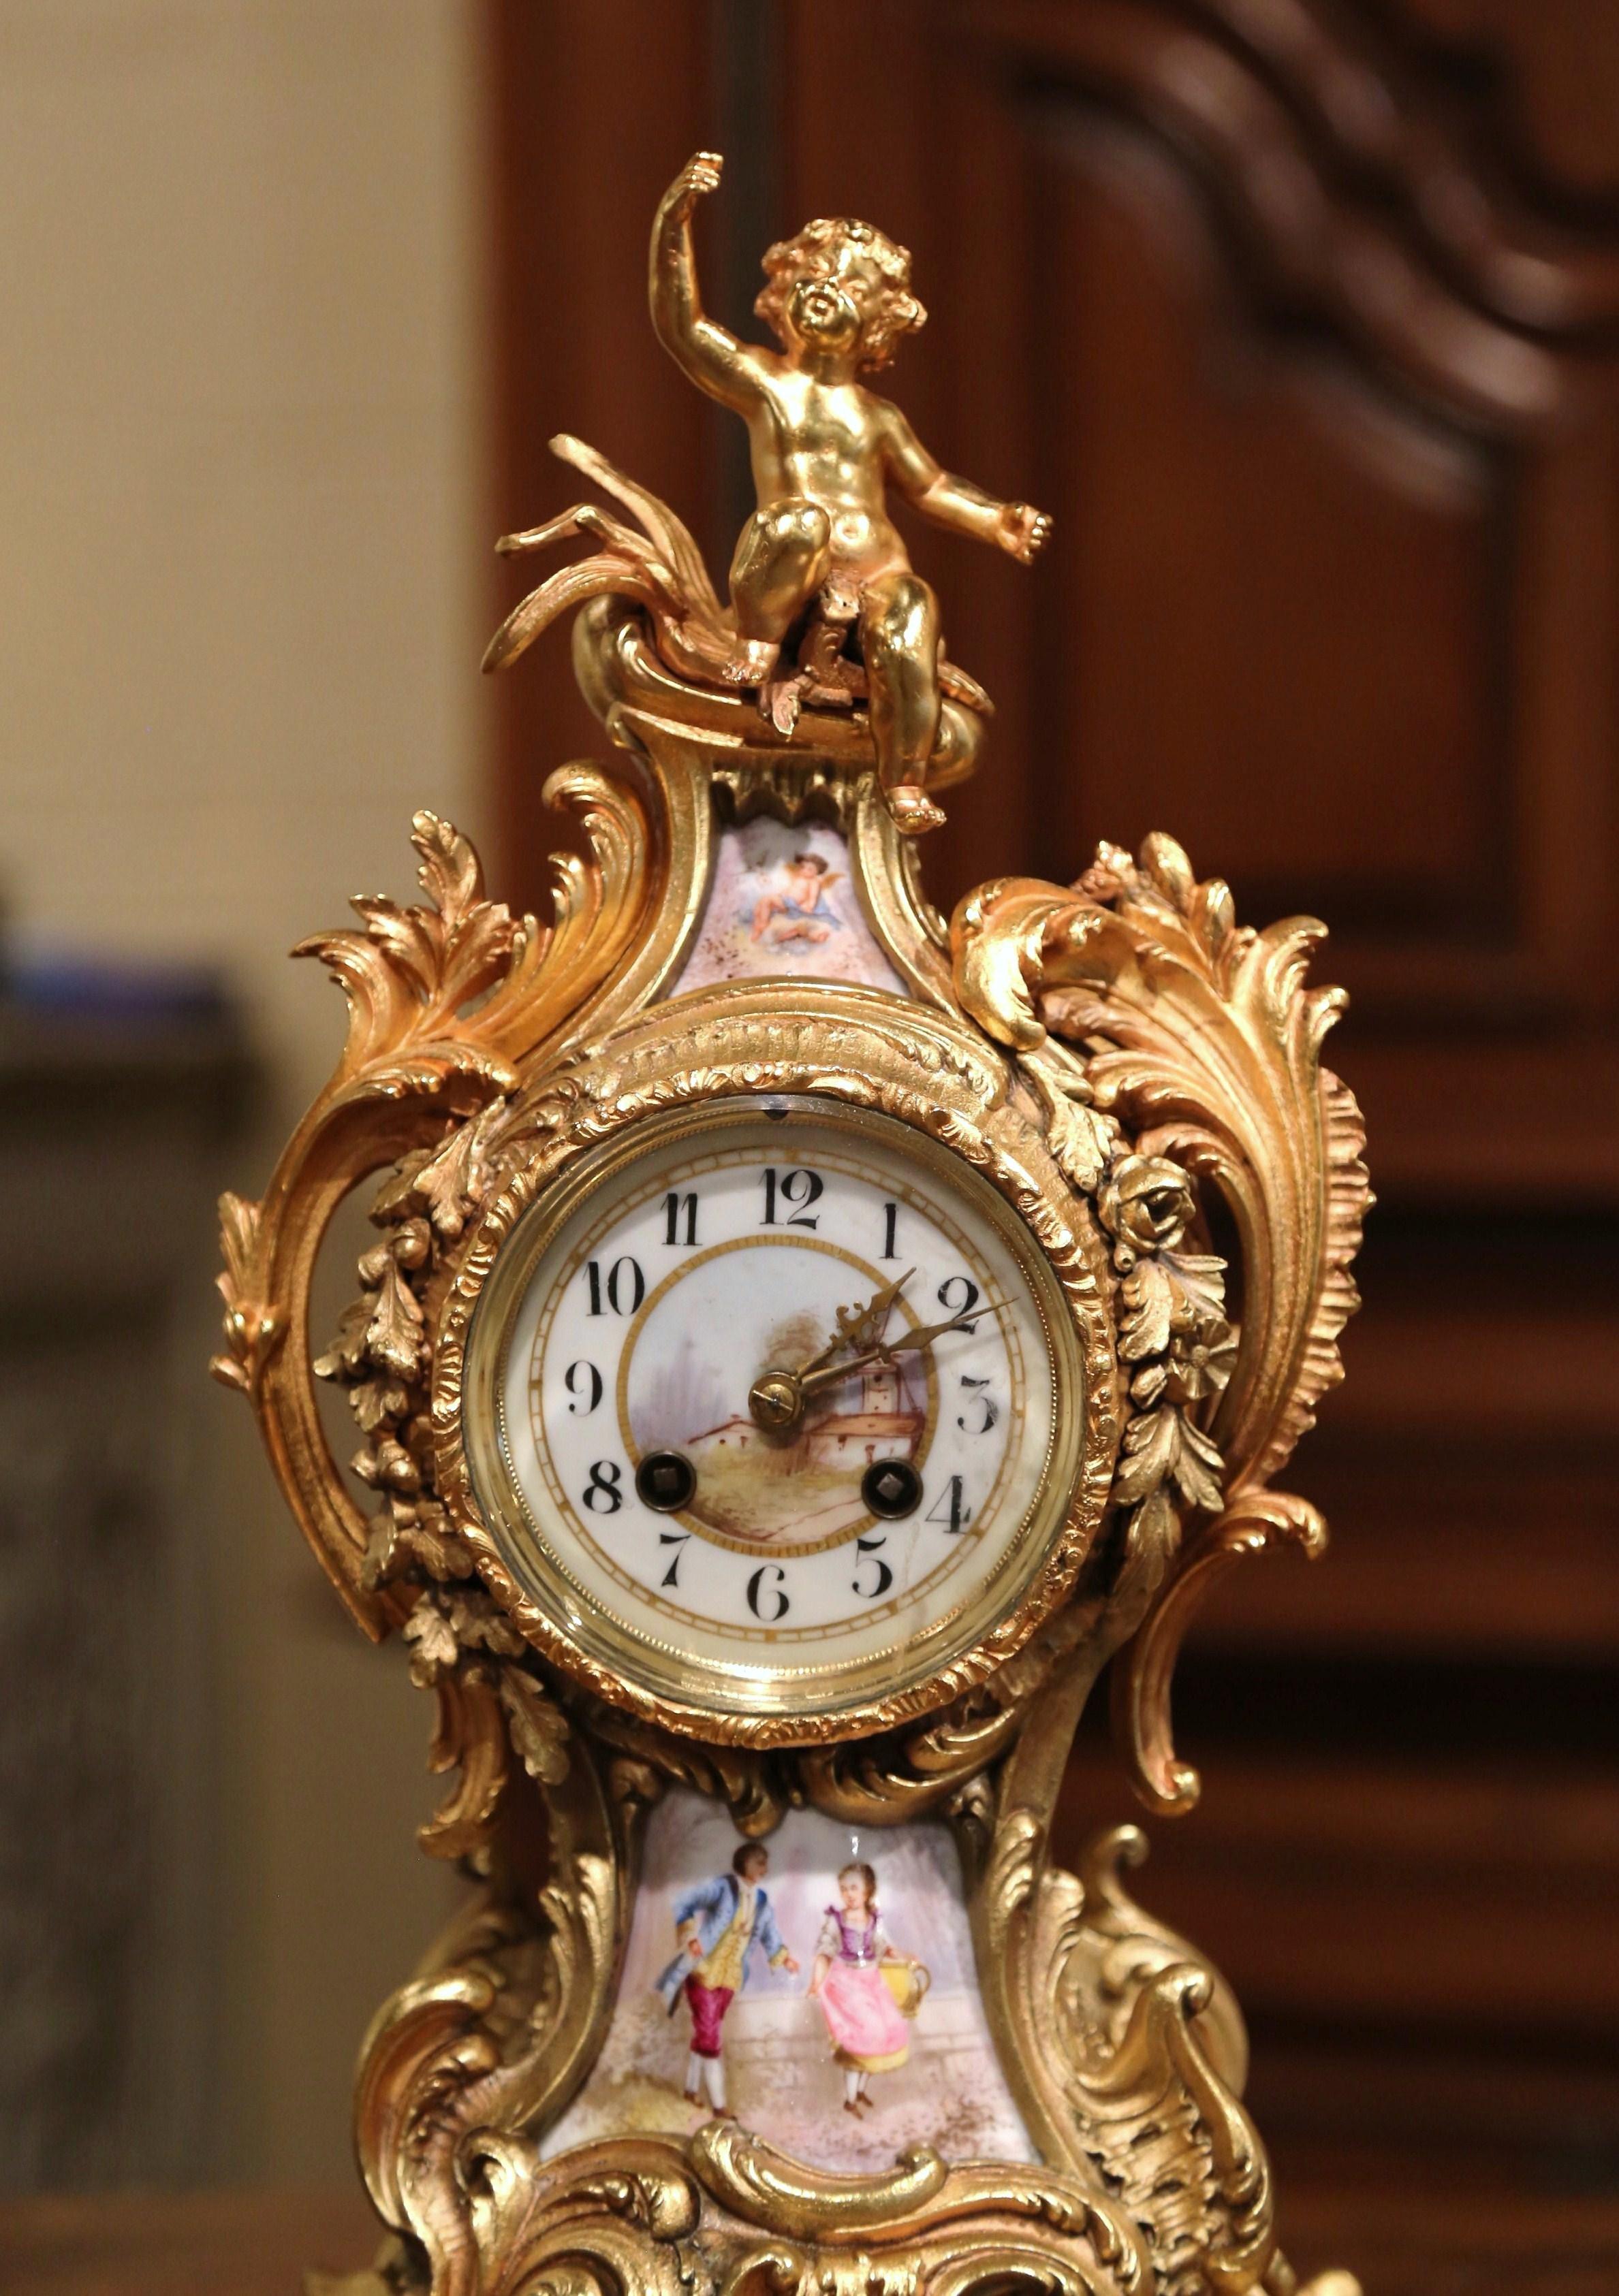 Crafted in Paris, France circa 1860, the antique time keeper stands on an attached intricate base; the clock is decorated throughout with foliage and acanthus leaf motifs embellished with a cherub sculpture at the pediment. The clock is further